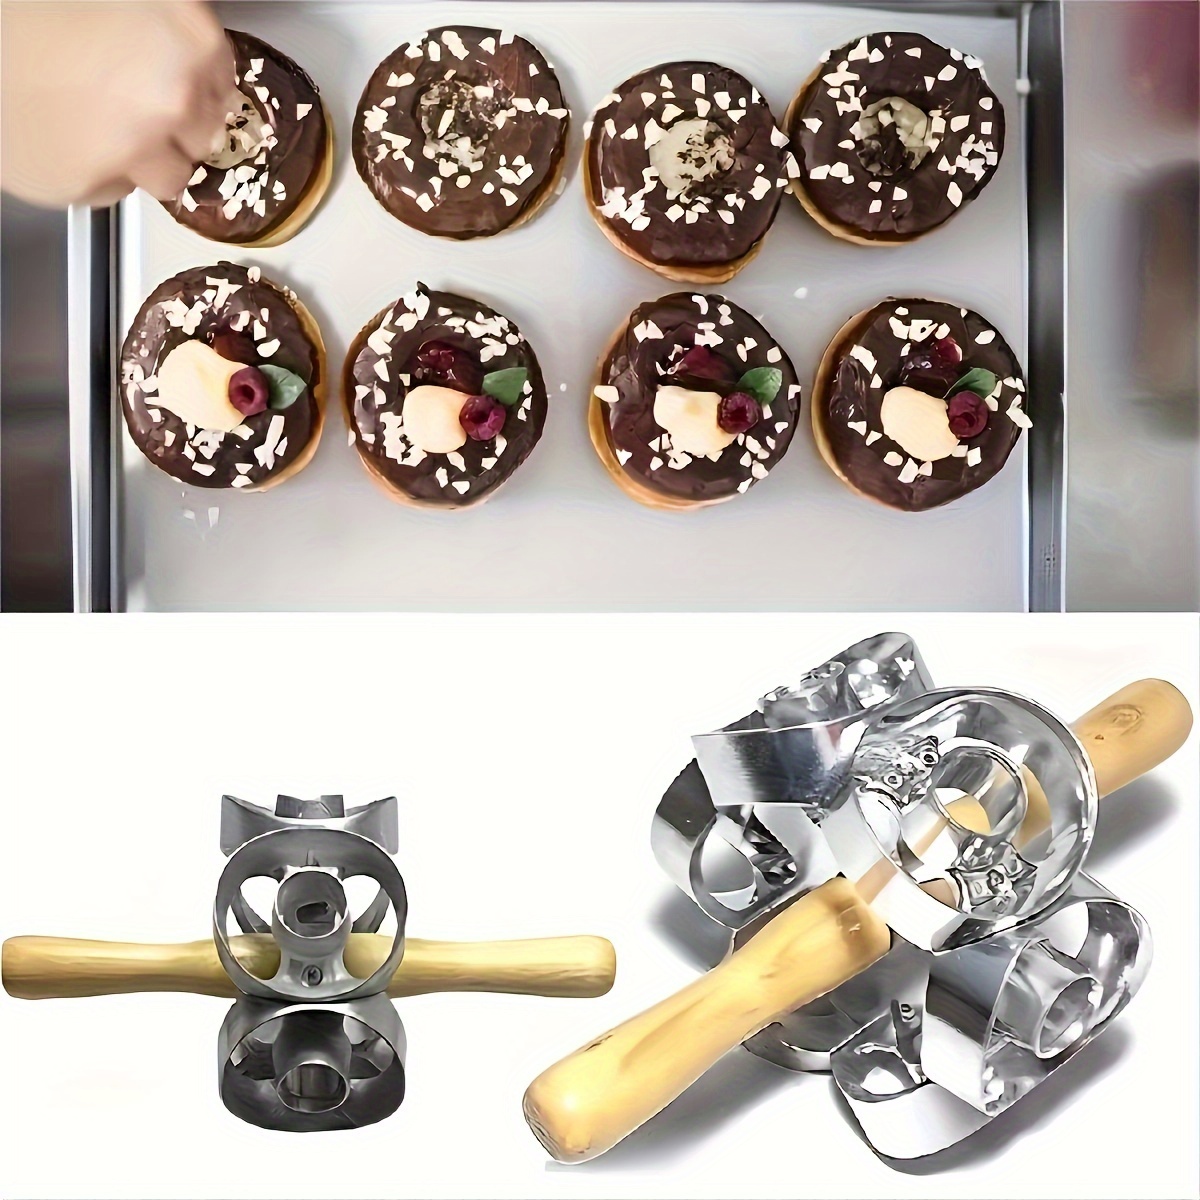 1pc European Standard 750w Donut Maker, Suitable For Children's Breakfast,  Snacks, Desserts, Etc. With Non-stick Surface, Can Make 6 Donuts